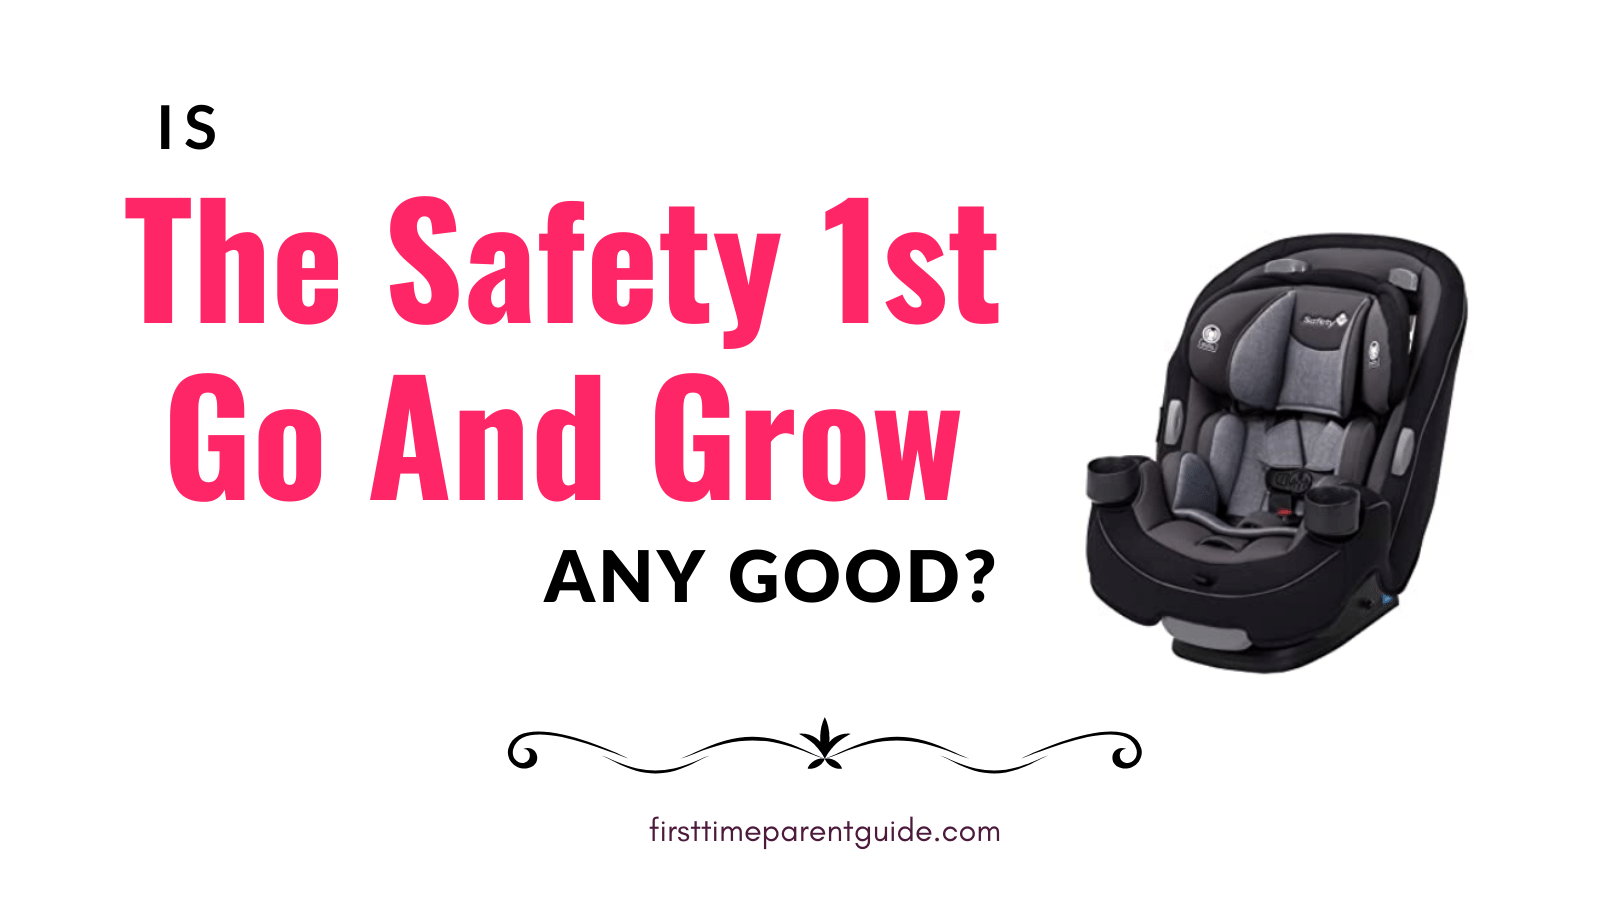 The Safety 1st Go And Grow